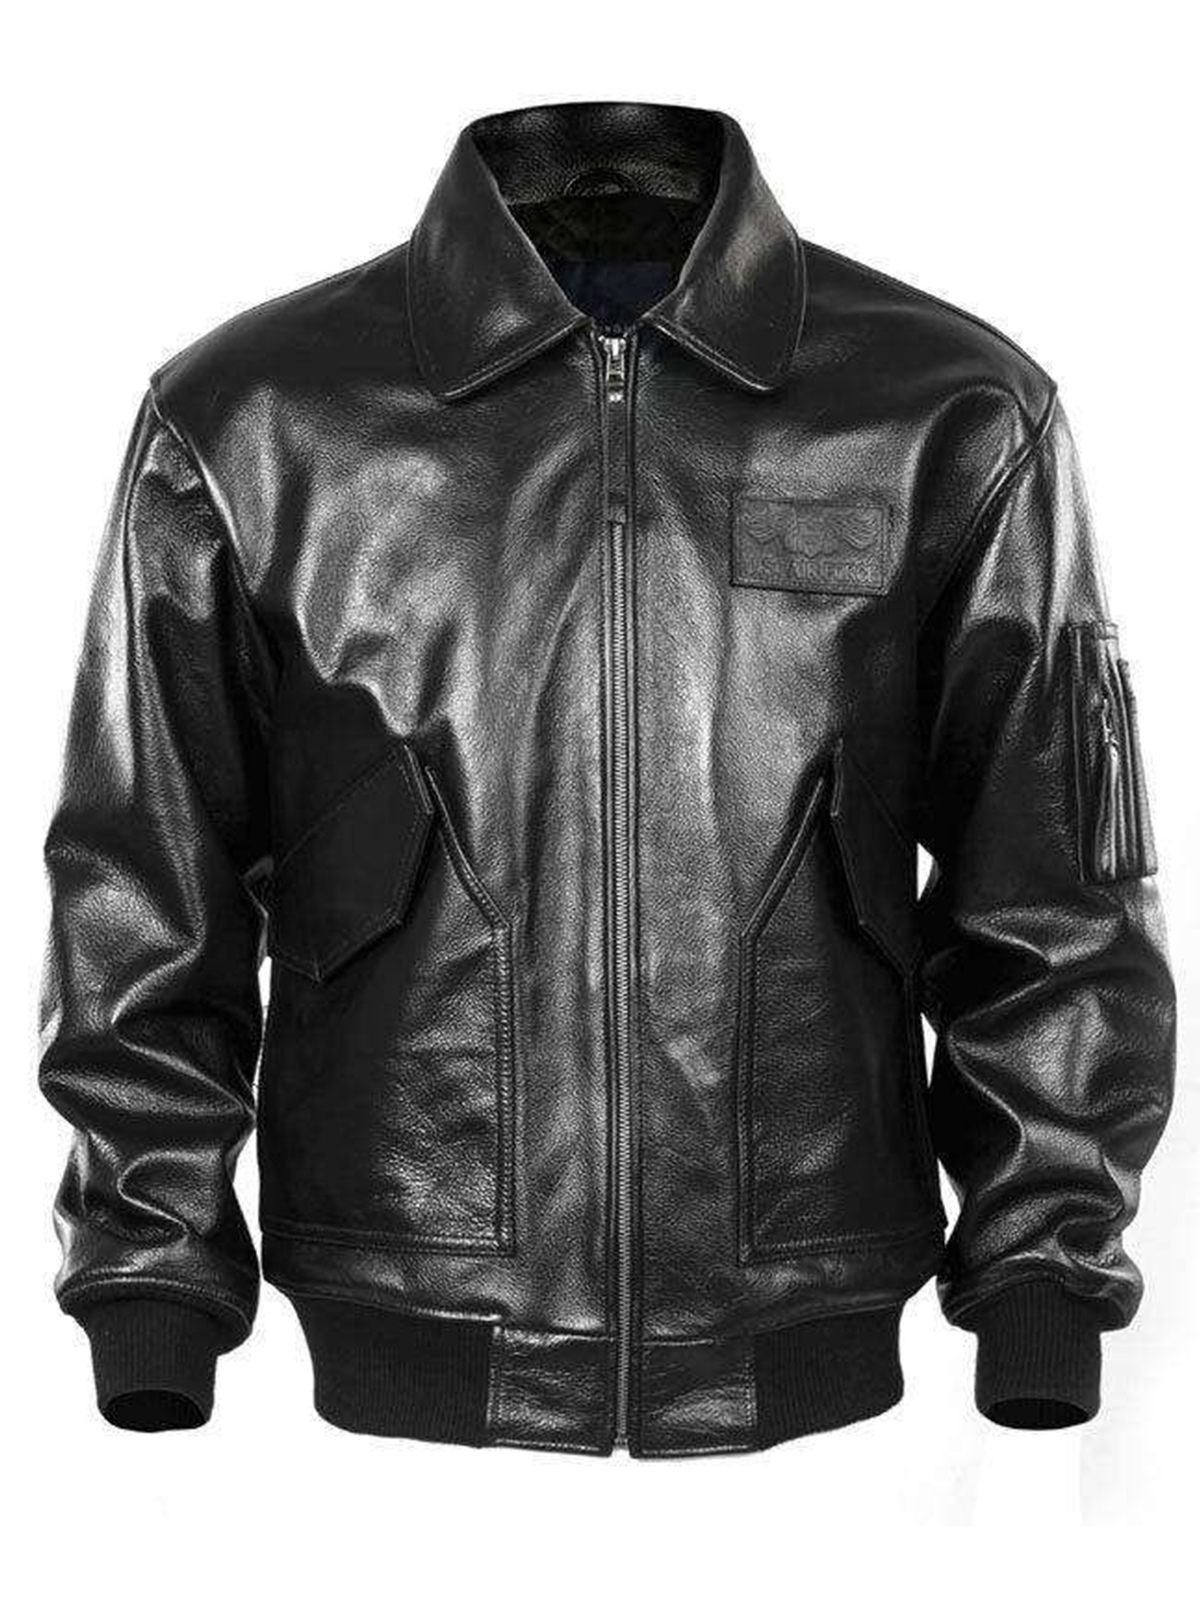 US Air Force Pilot Military Russian Aviator Black Leather Jacket